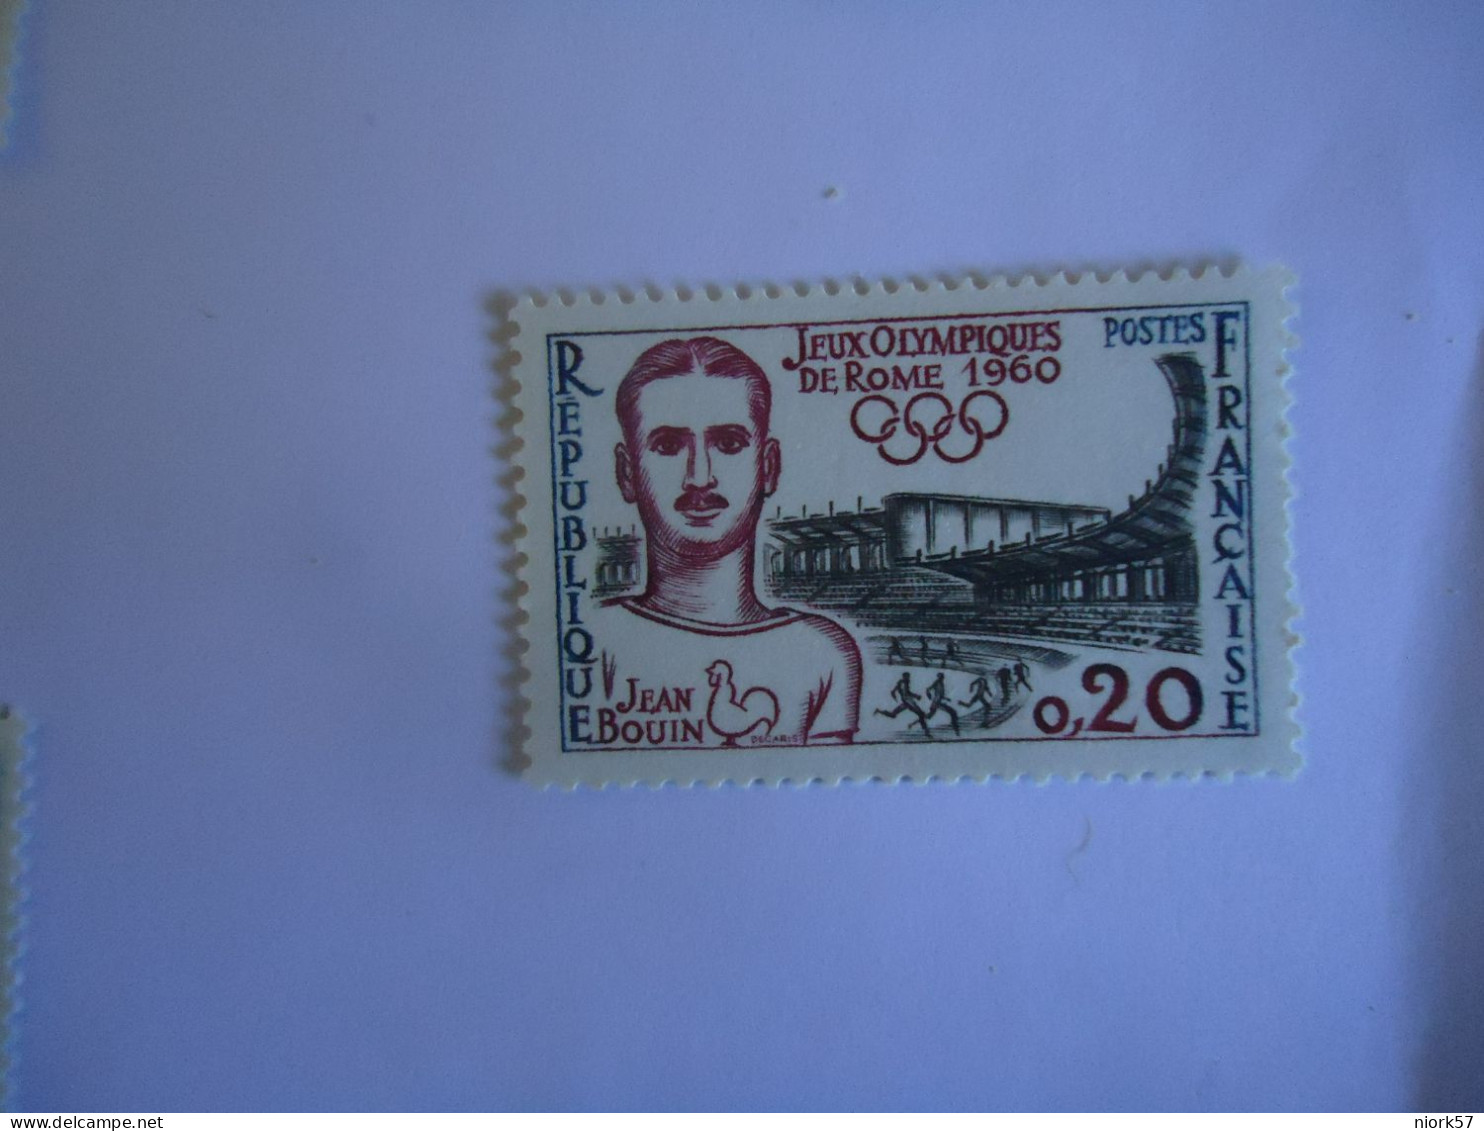 FRANCE ΜΝΗ   STAMPS  OLYMPIC GAMES ΡΟΜΕ  1960 - Ete 1960: Rome